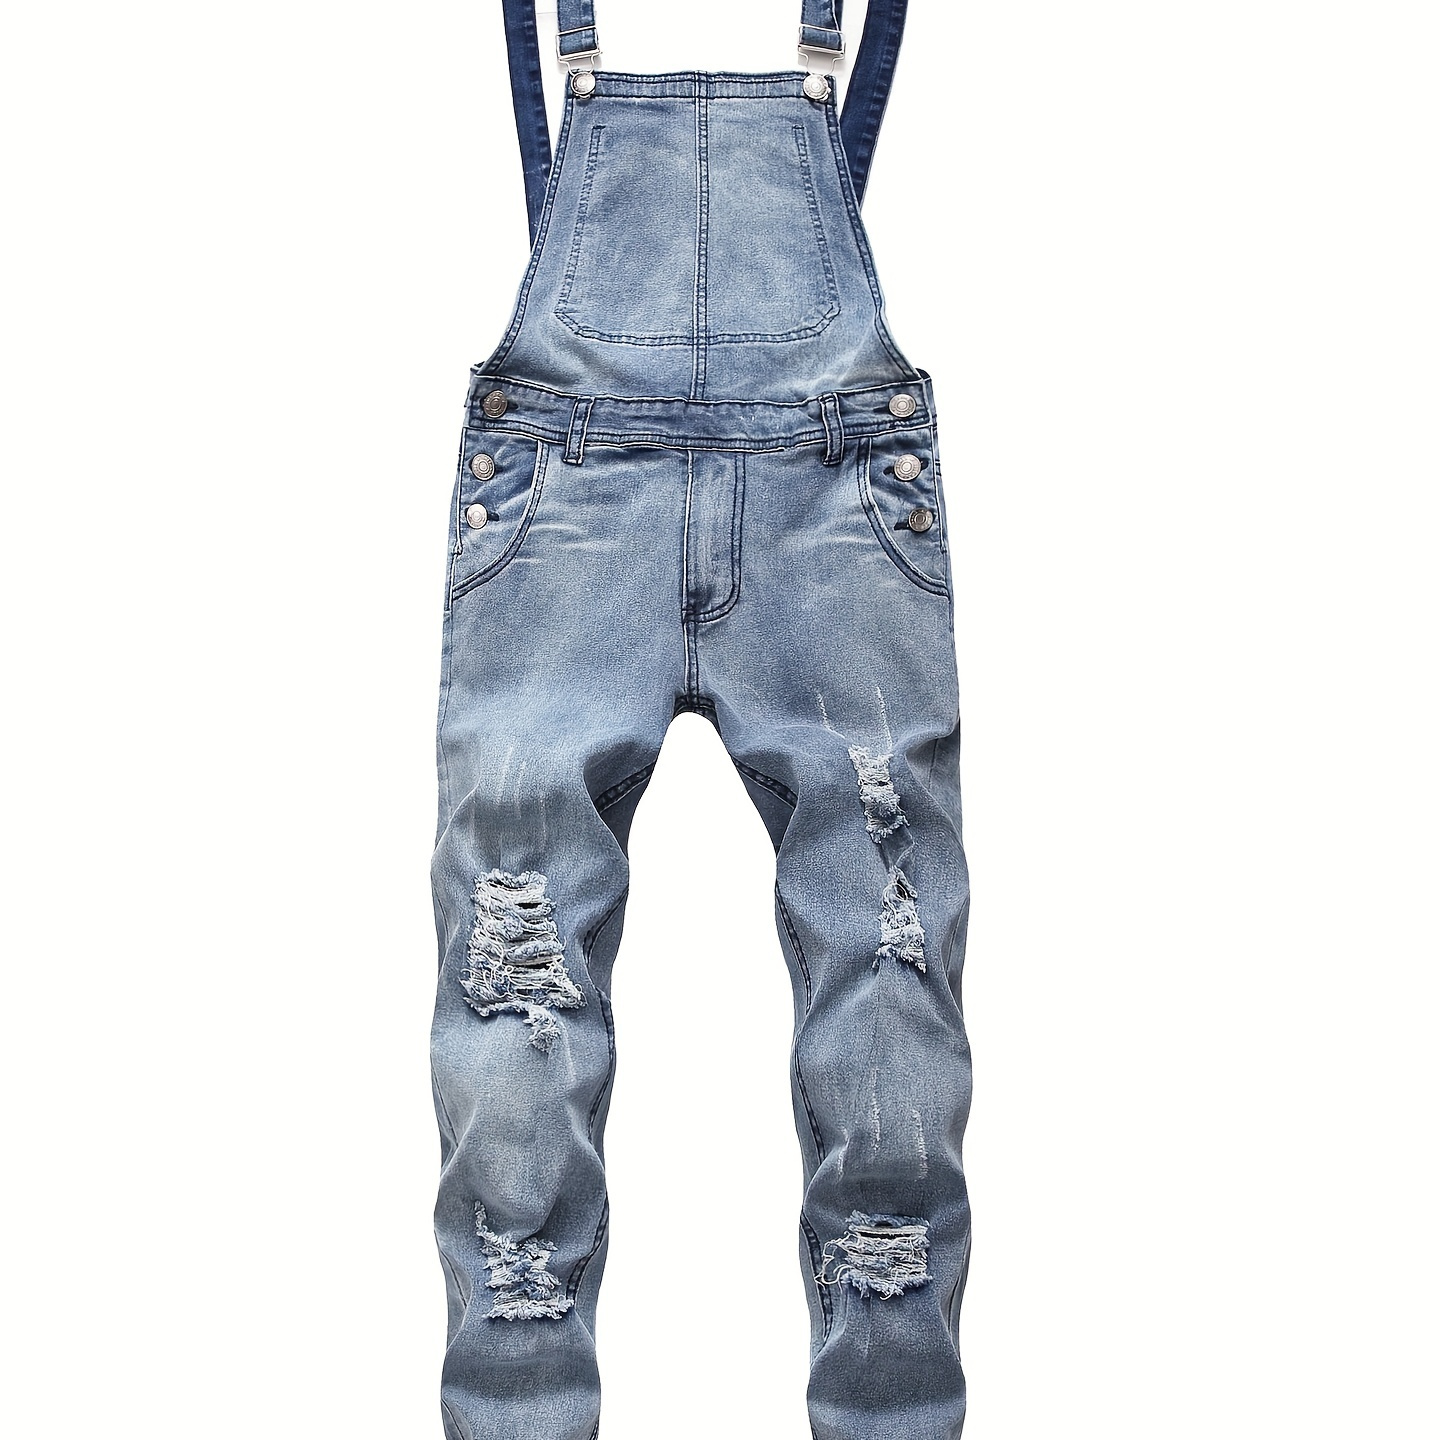 

Classic Design Ripped Denim Overalls, Men's Casual Medium Stretch Street Style Jumpsuit For All Seasons